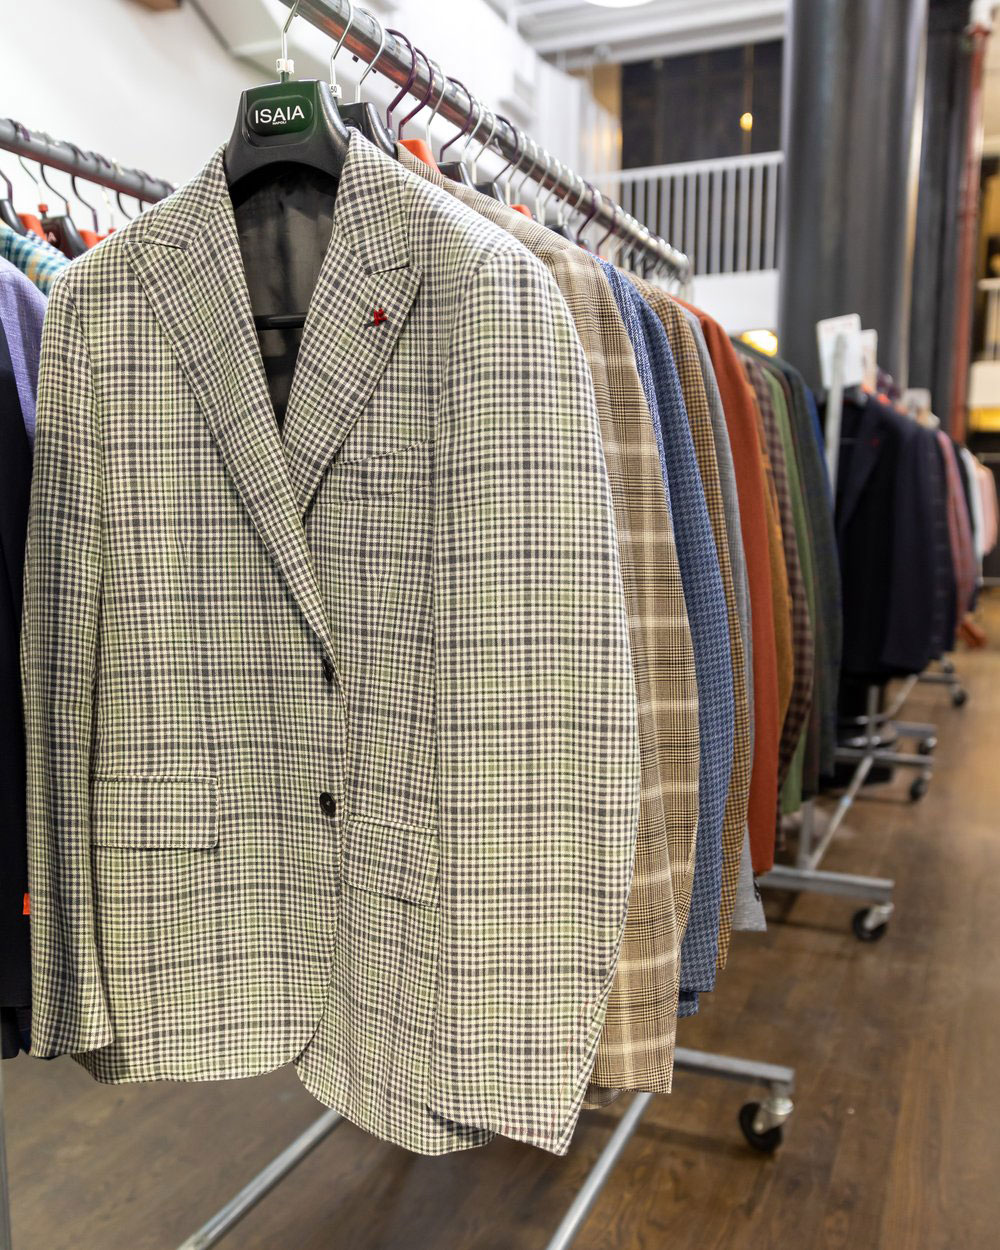 Isaia Clothing & Accessories New York Sample Sale in Images